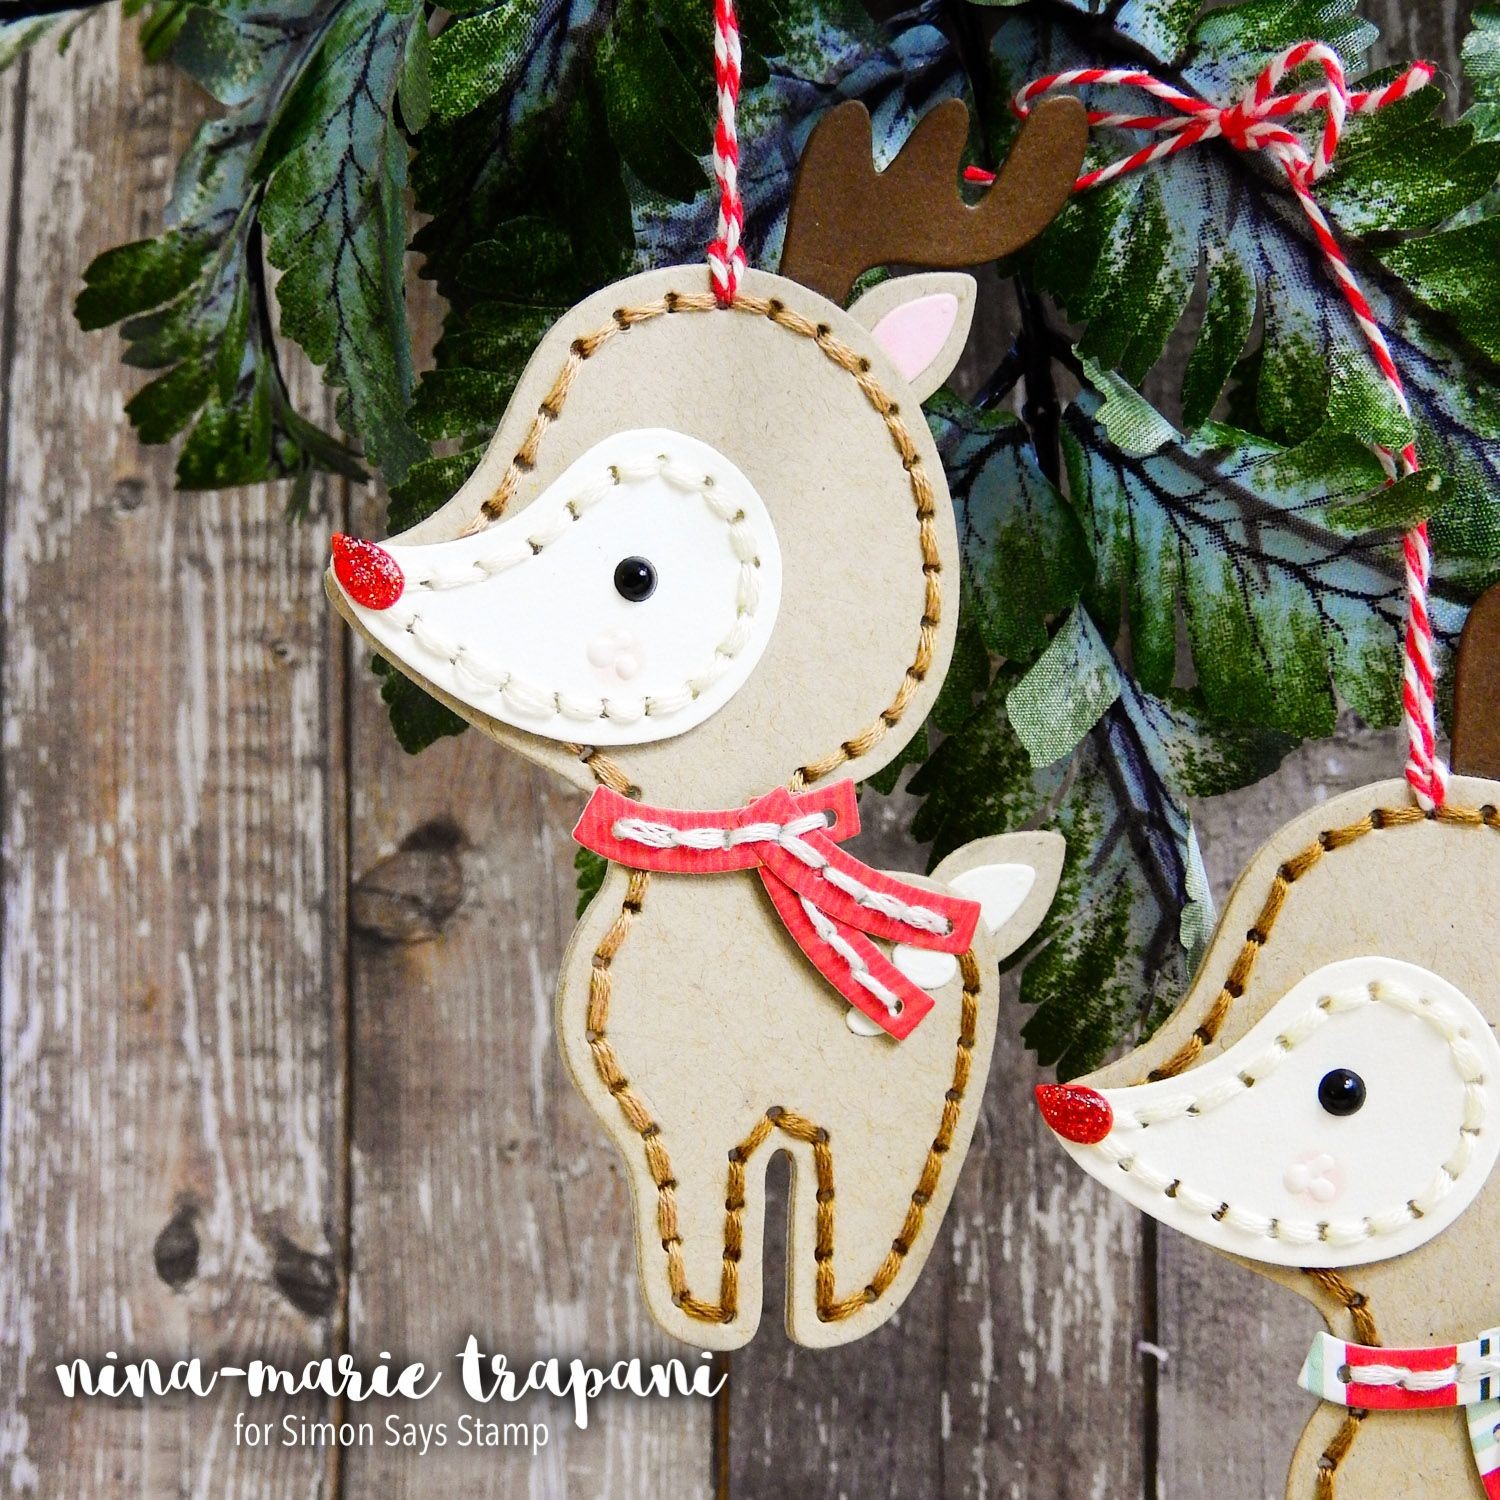 Papercraft Ideas for Christmas Studio Monday with Nina Marie Kindness Day Handmade Paper ornament